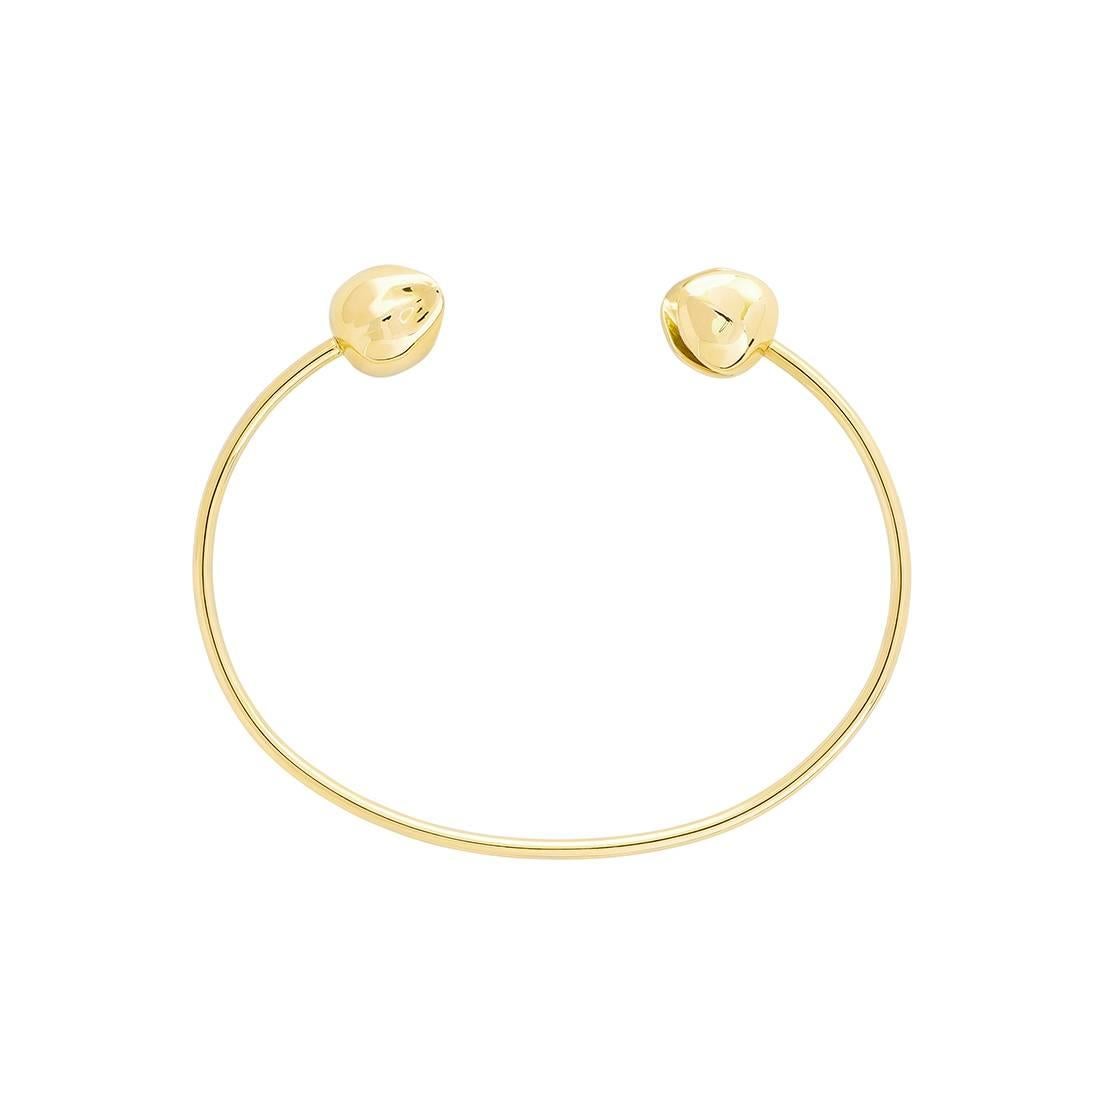 Simple yet statement, the Orchid Bangle draws inspiration from the organic forms of the blossoming orchid pods of Papua New Guinea. Handcrafted in 18k Fairtrade solid gold and set with two luminescent Akoya pearls, this piece is the ultimate